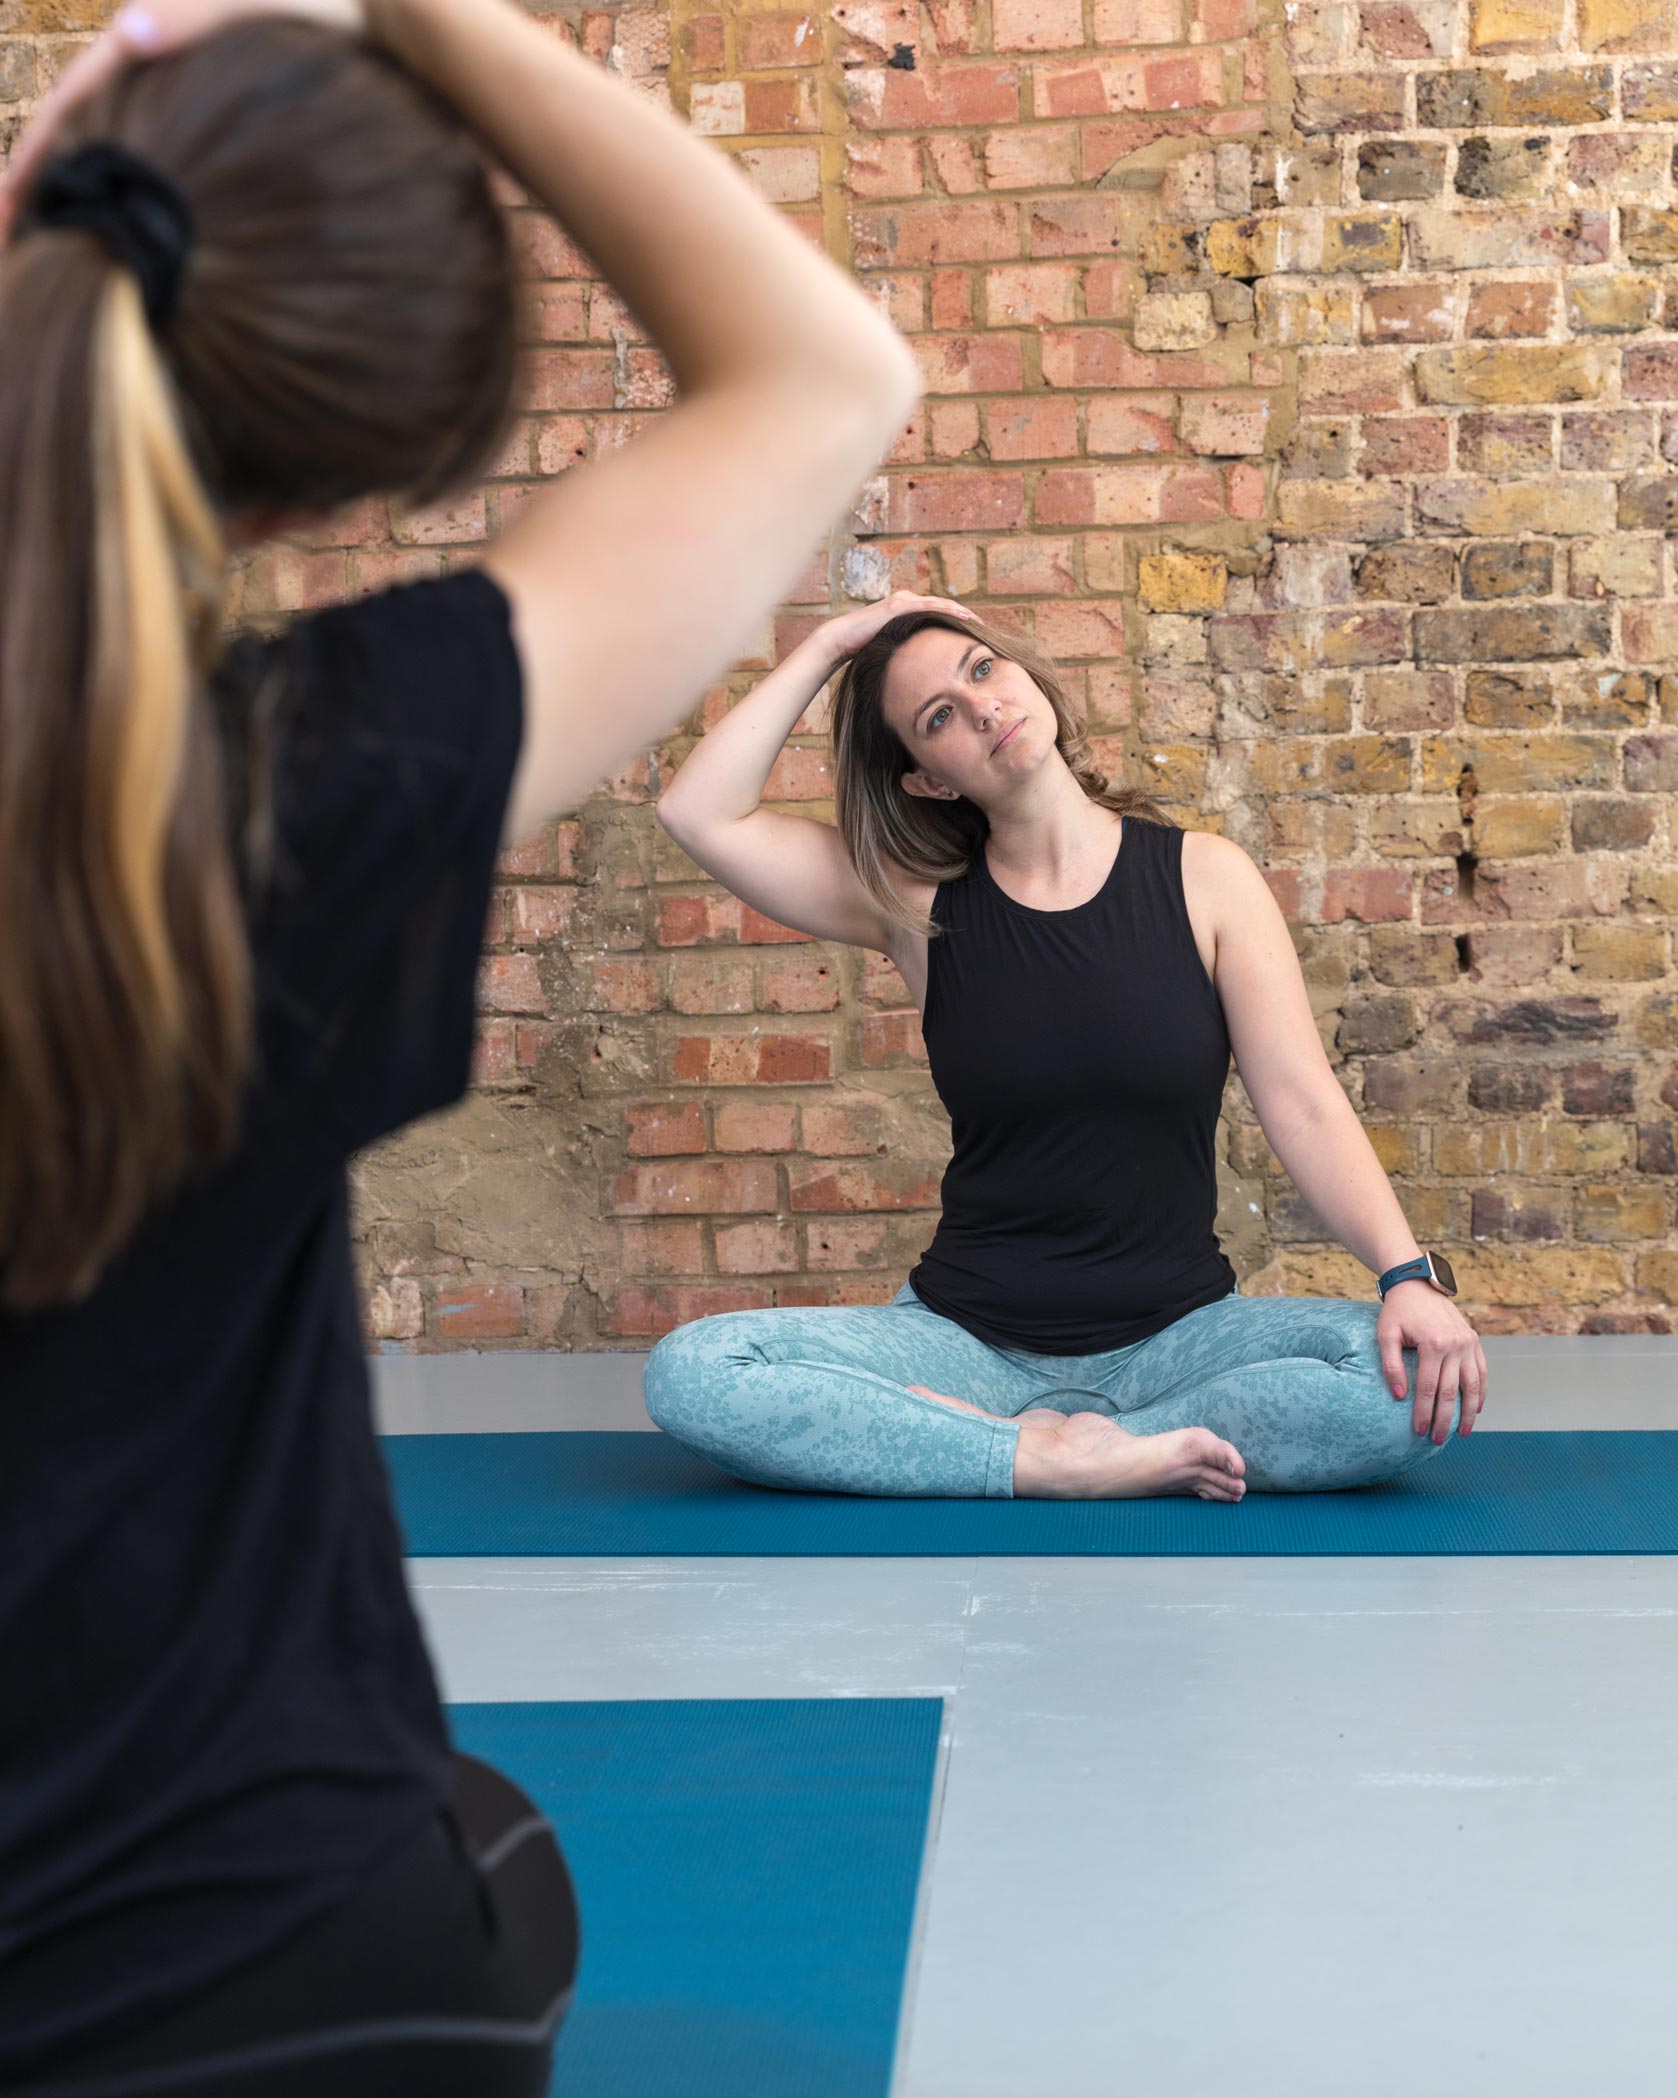 A fitness instructor leads an exercise class in London during a personal branding photography shoot